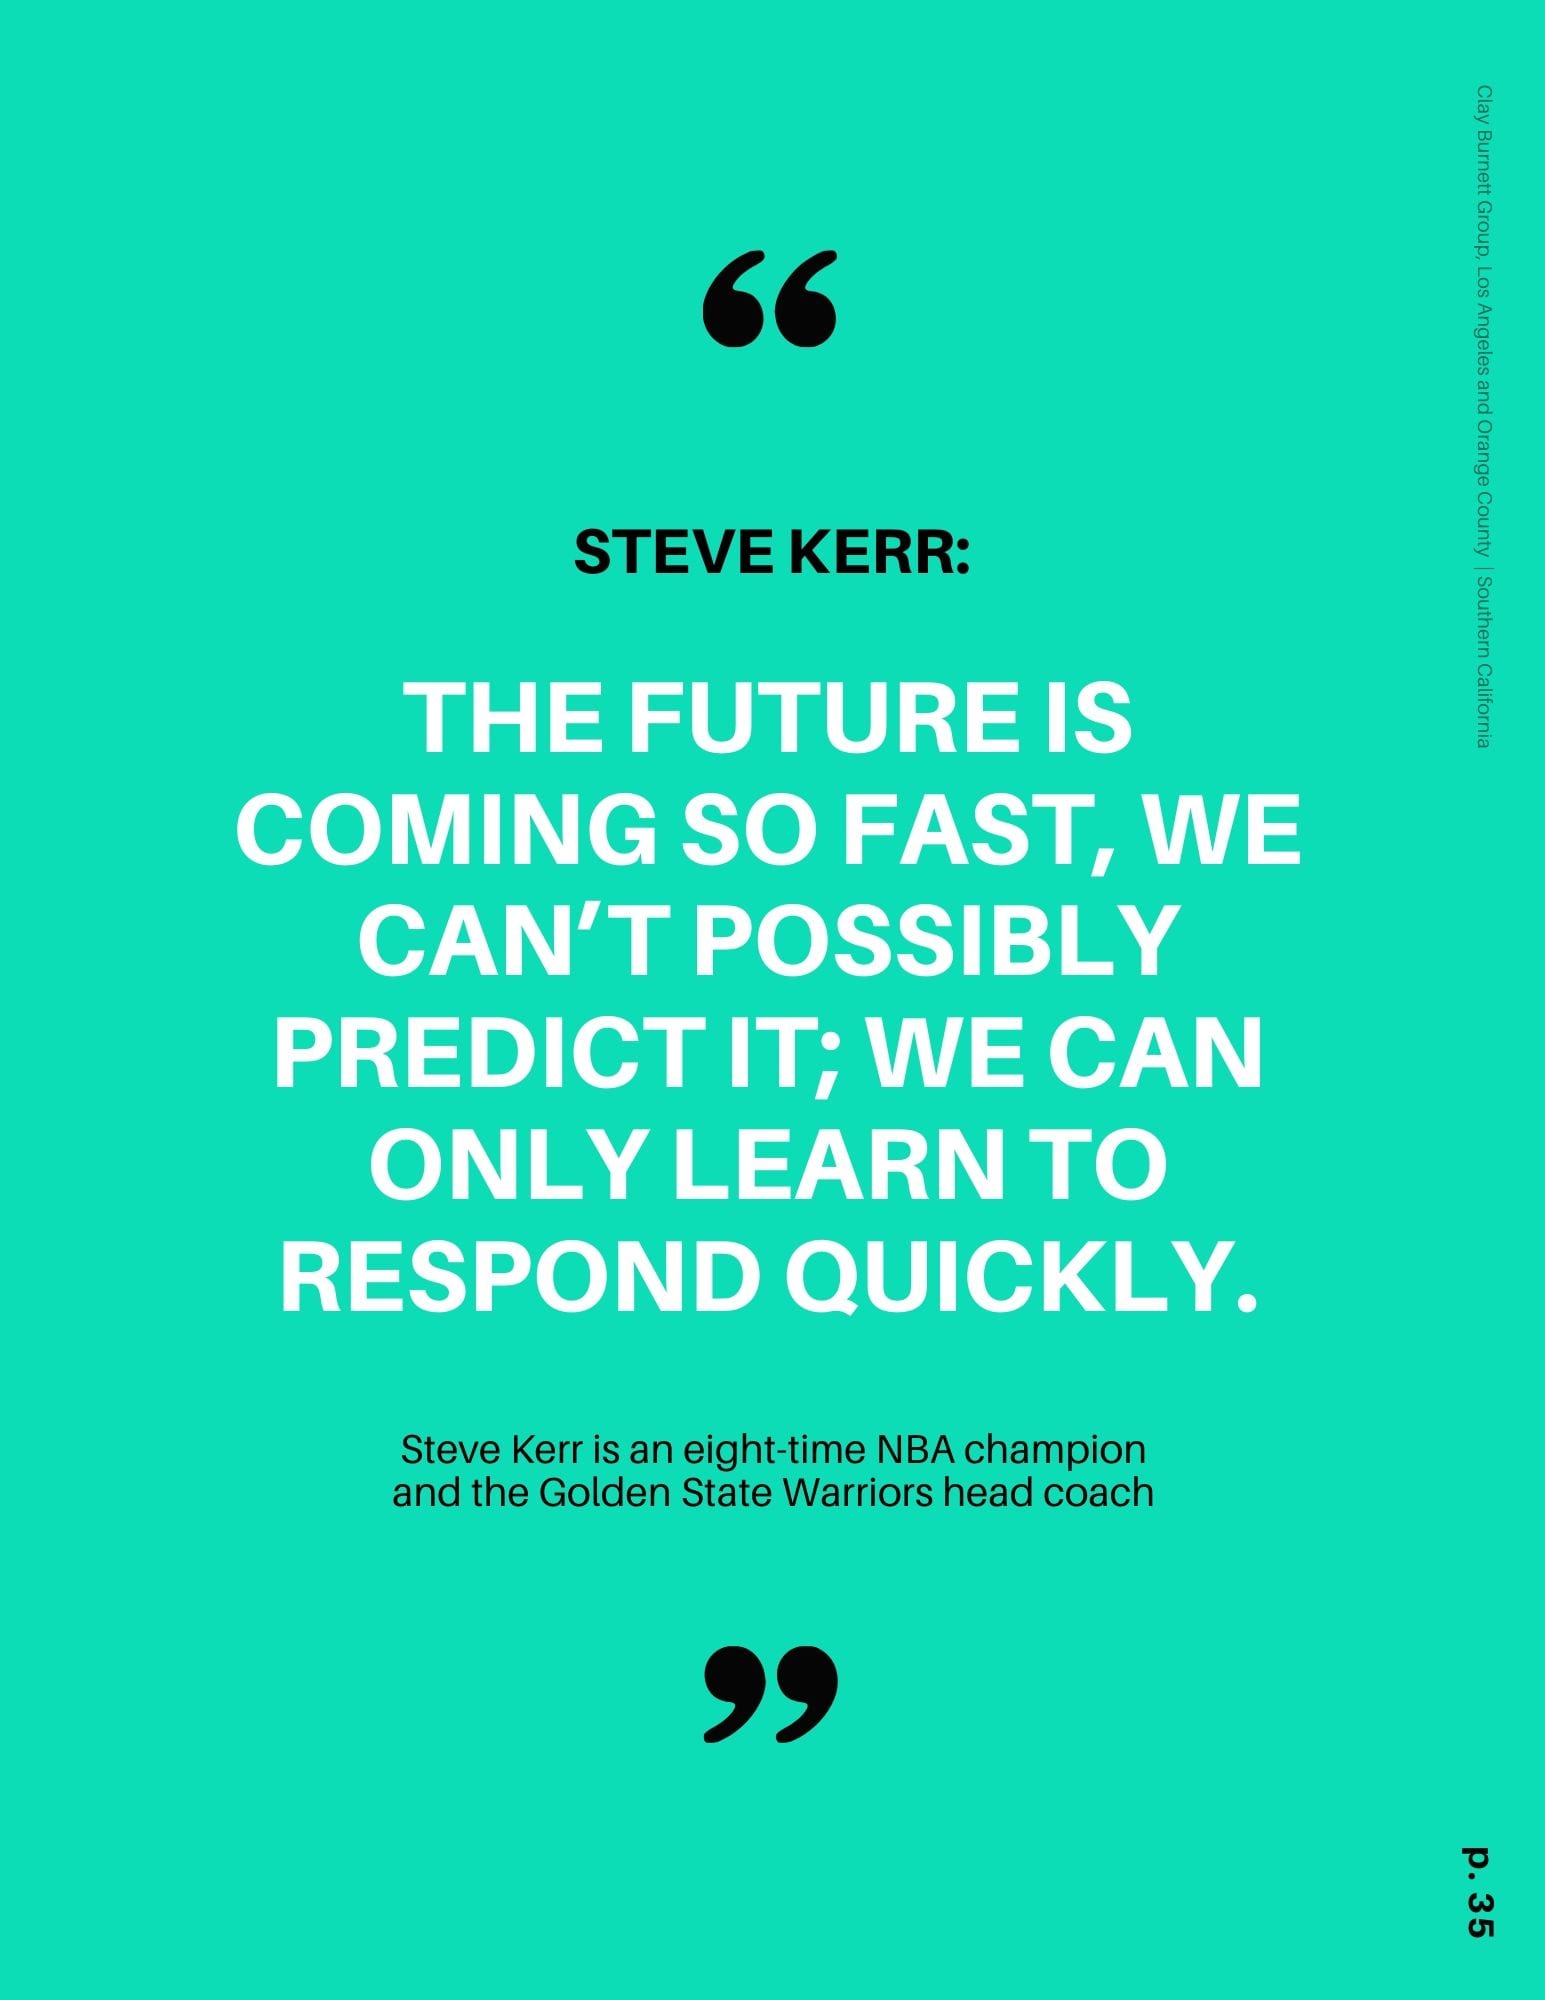  “The future is coming so fast, we can’t possibly predict it; we can only learn to respond quickly.” -Steve Kerr,